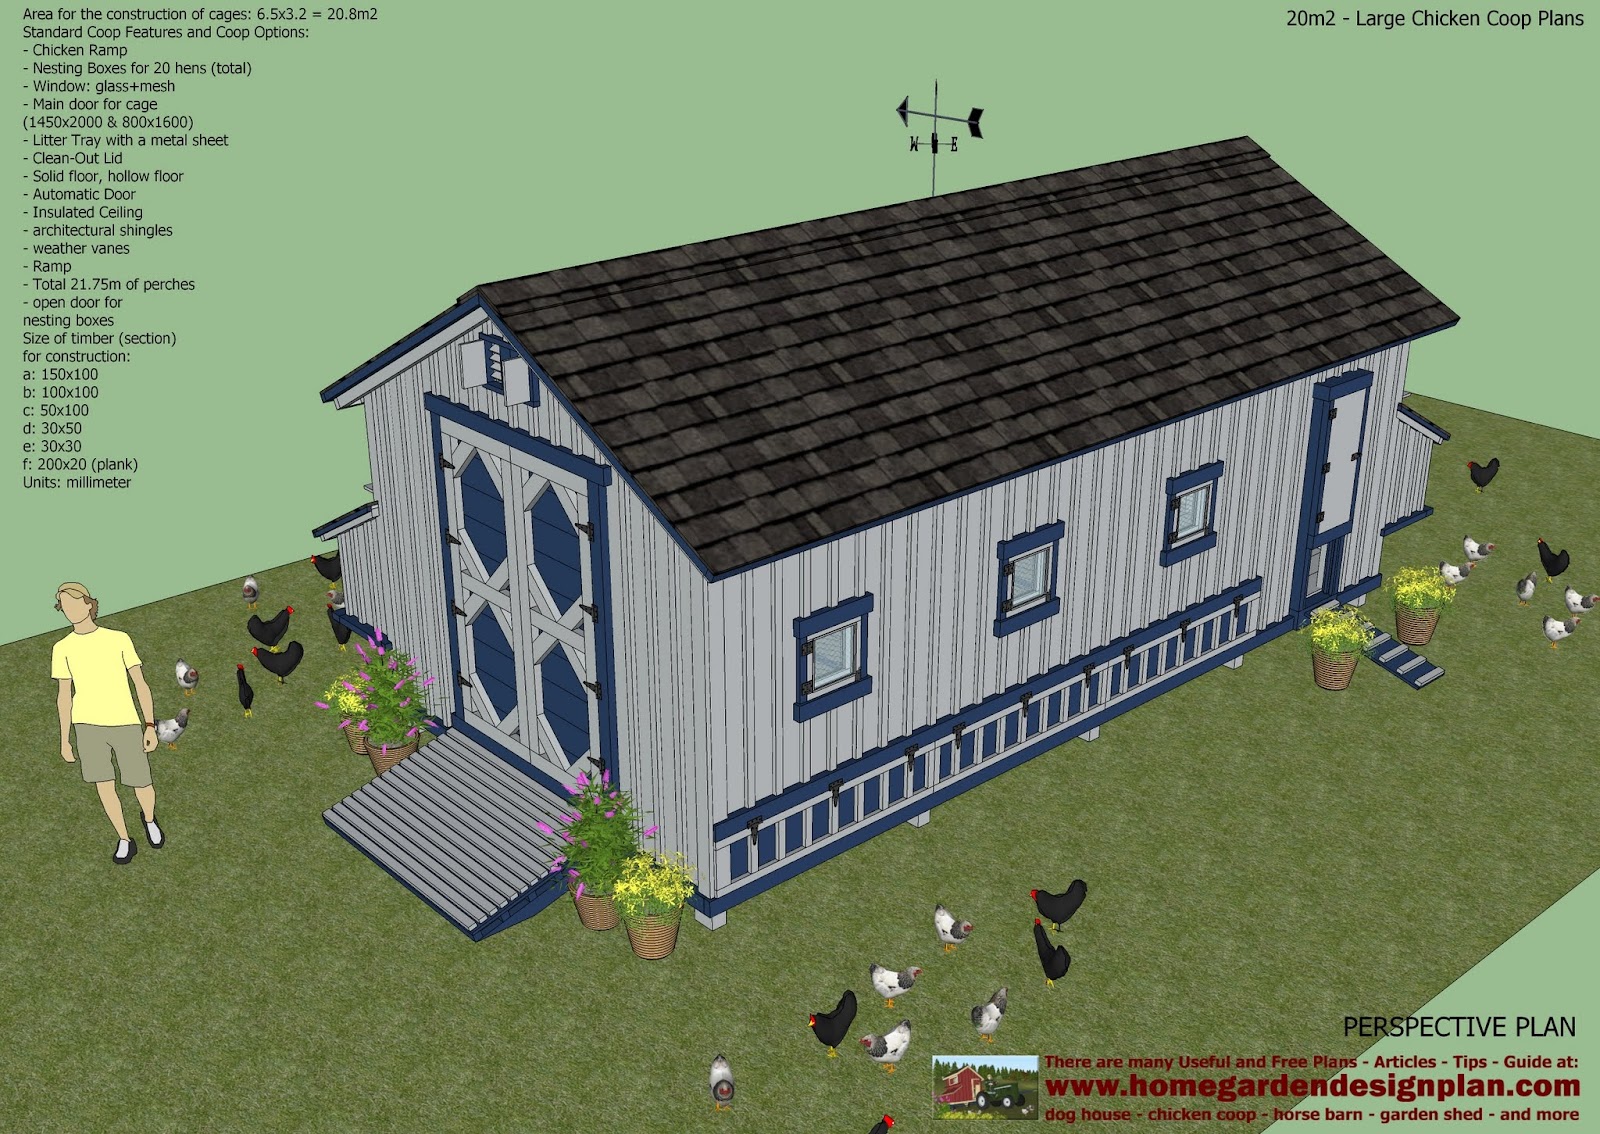 L310 - Large chicken coop plans - Chicken coop design - How to build a ...